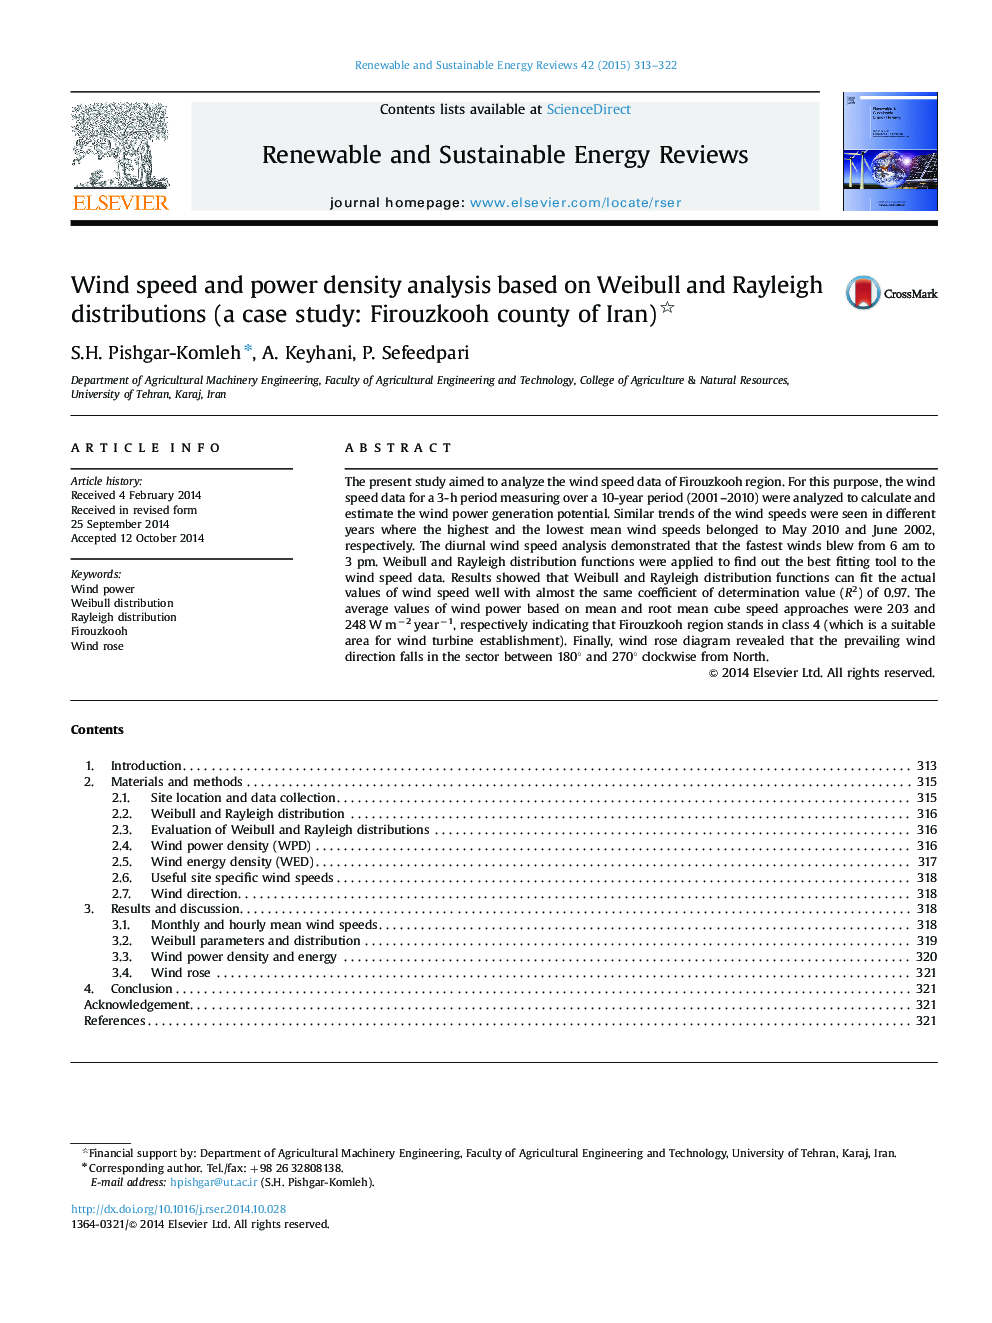 Wind speed and power density analysis based on Weibull and Rayleigh distributions (a case study: Firouzkooh county of Iran)